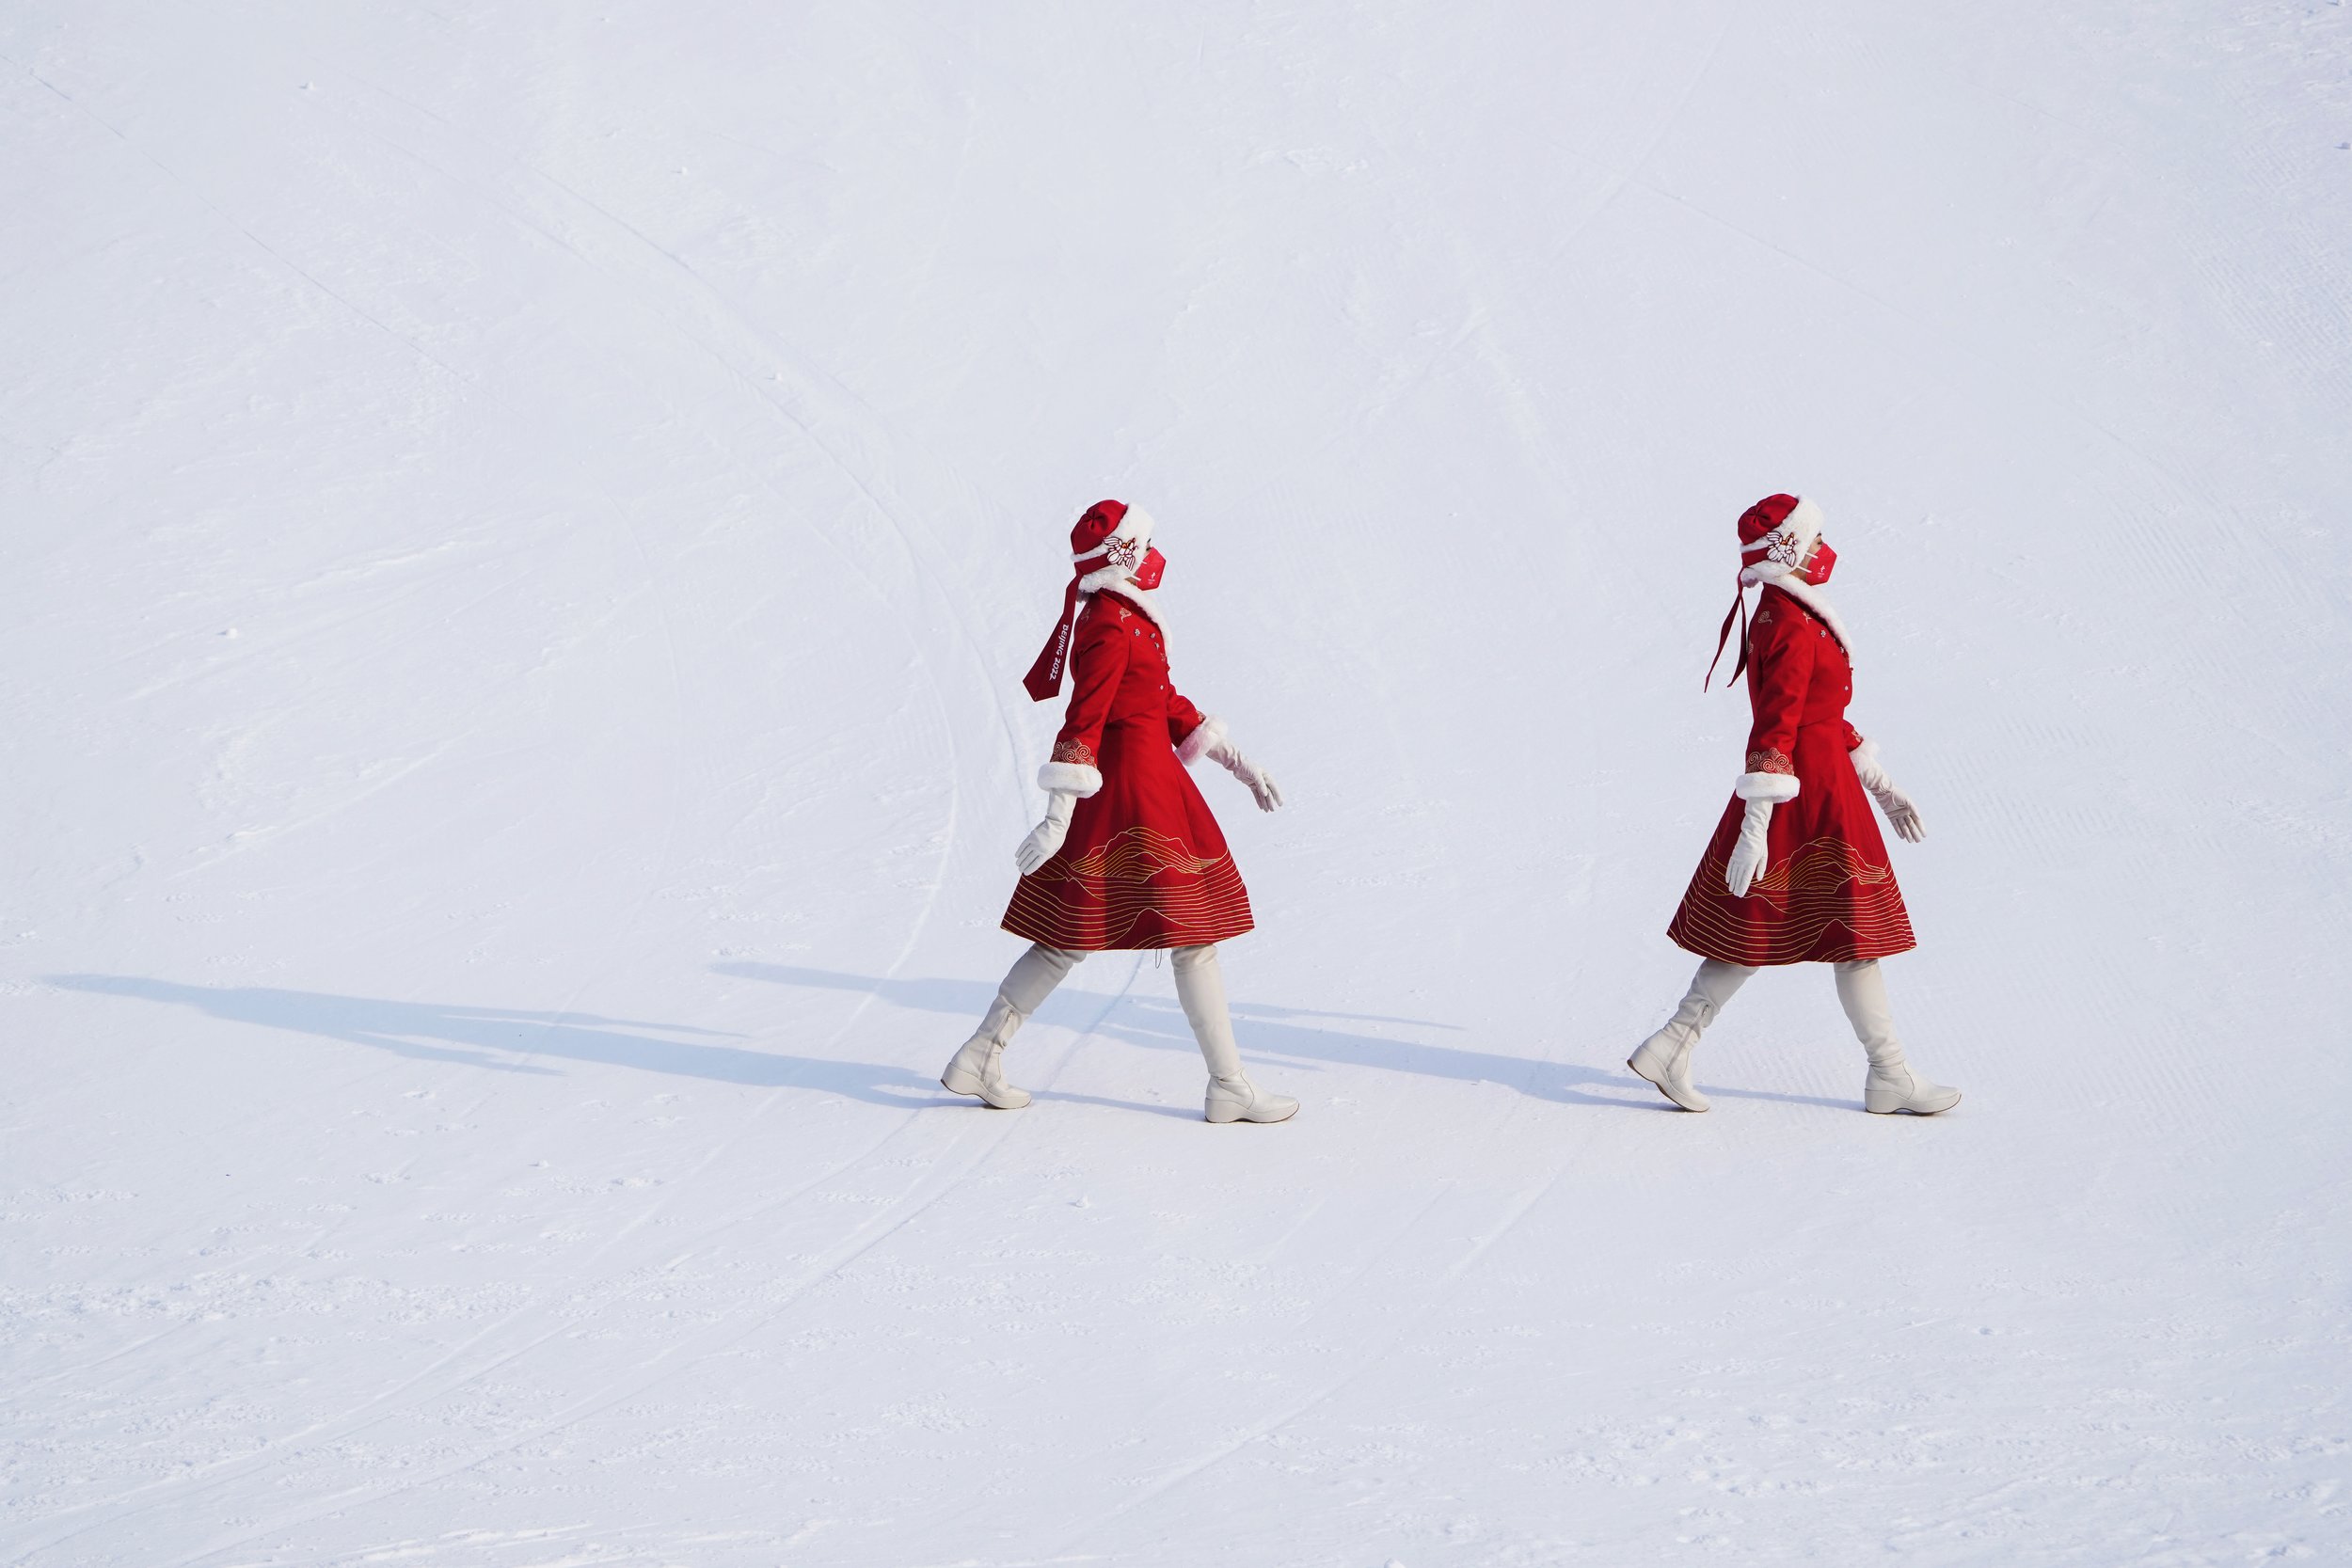  Hostesses walk during the award ceremony for the the women's slalom at the 2022 Winter Olympics, Wednesday, Feb. 9, 2022, in the Yanqing district of Beijing.(AP Photo/Pavel Golovkin) 